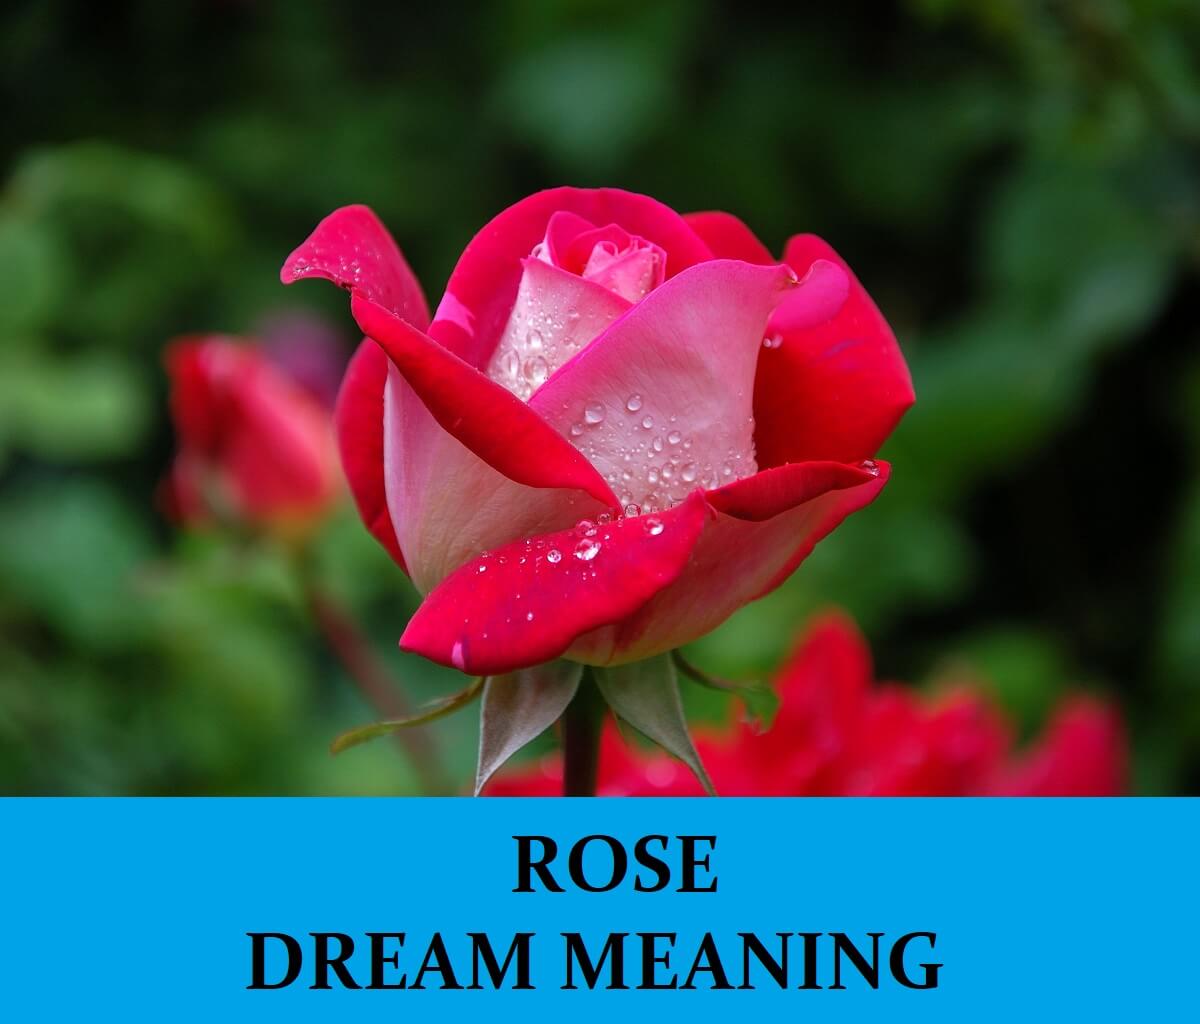 Rose Dream Meaning - Top 25 Dreams About Roses